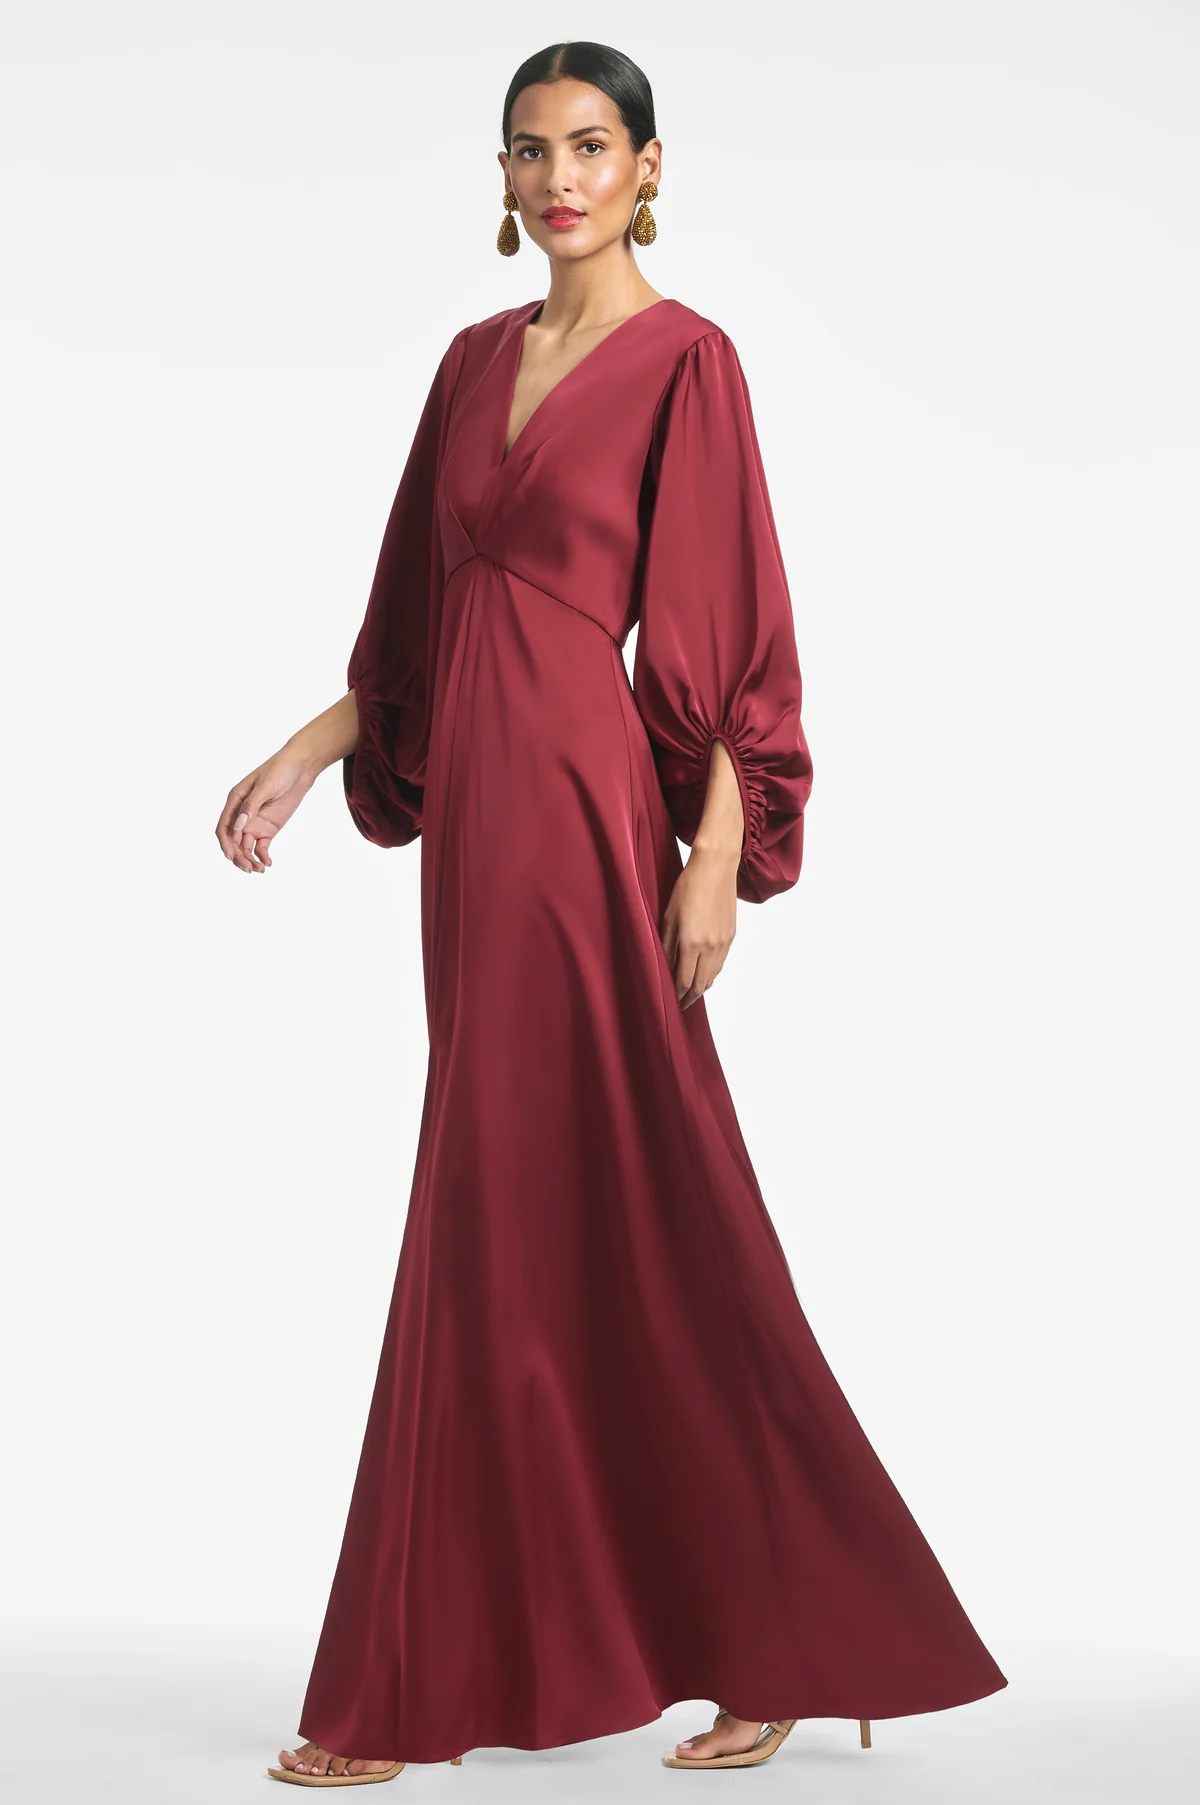 https://www.sachinandbabi.com/collections/black-tie/products/jenny-gown-bordeaux